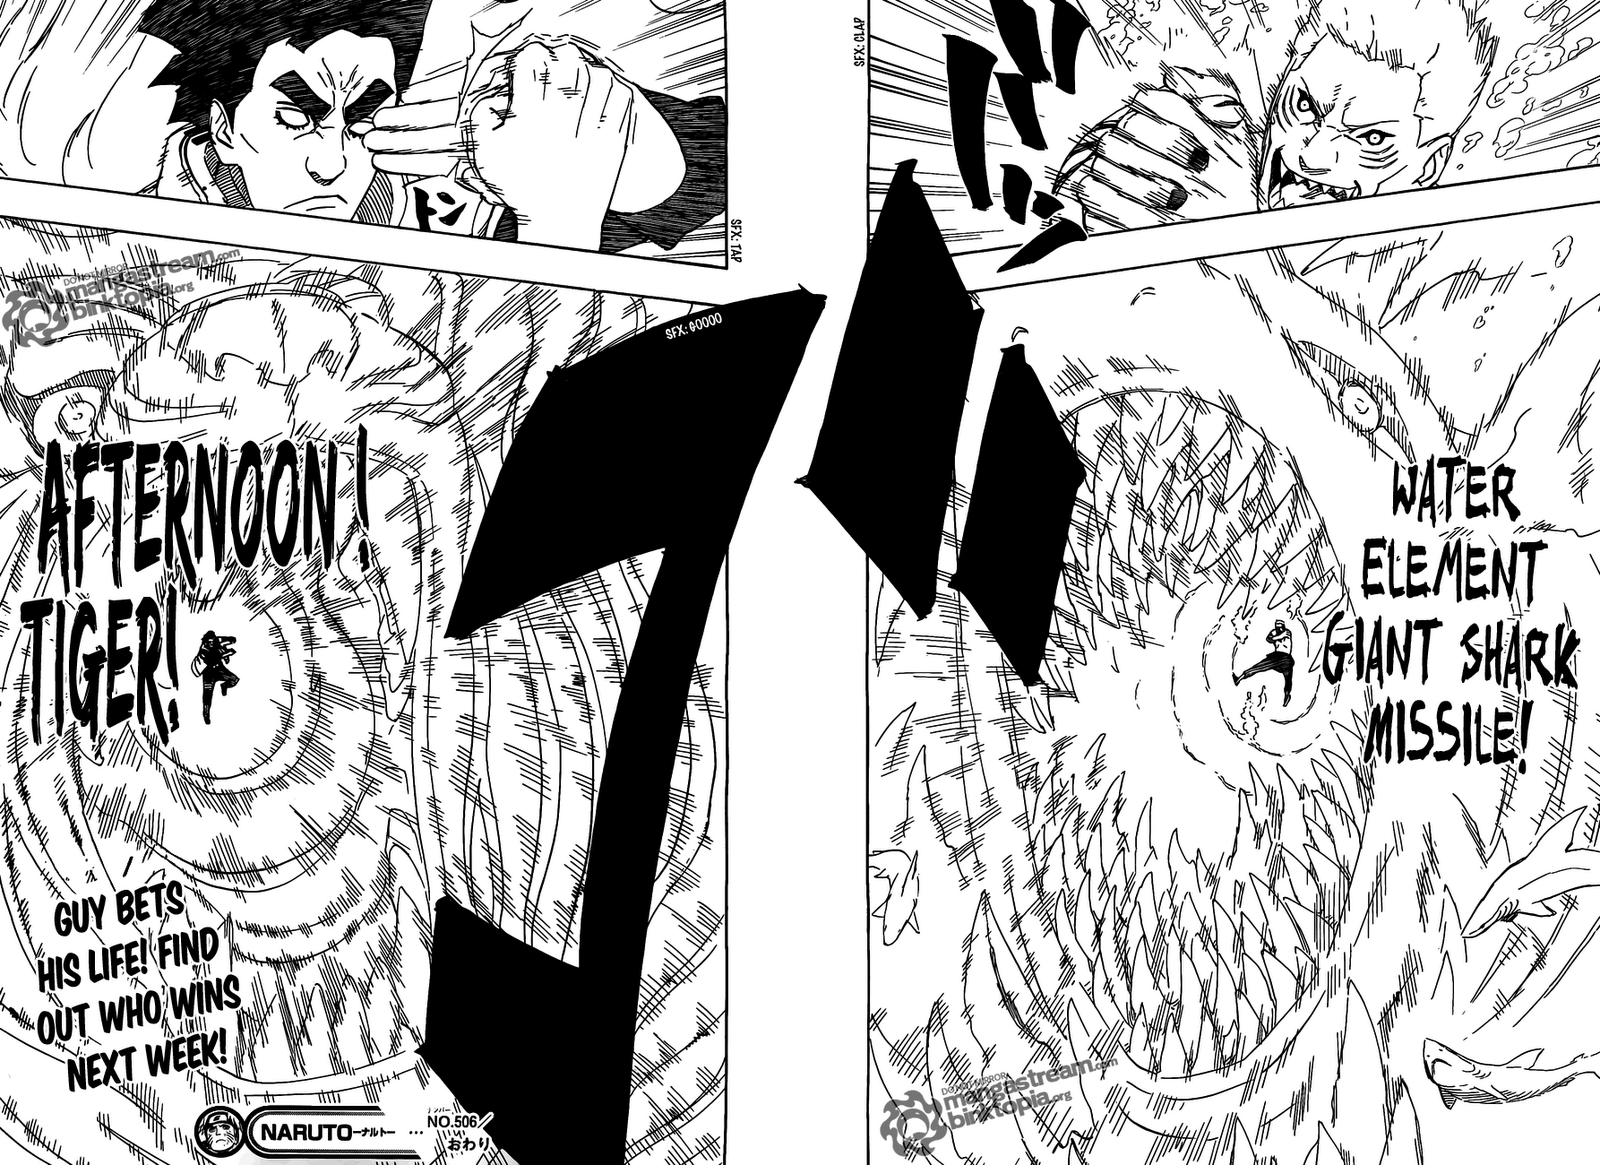 click here to read the whole chapter : Naruto Manga 506